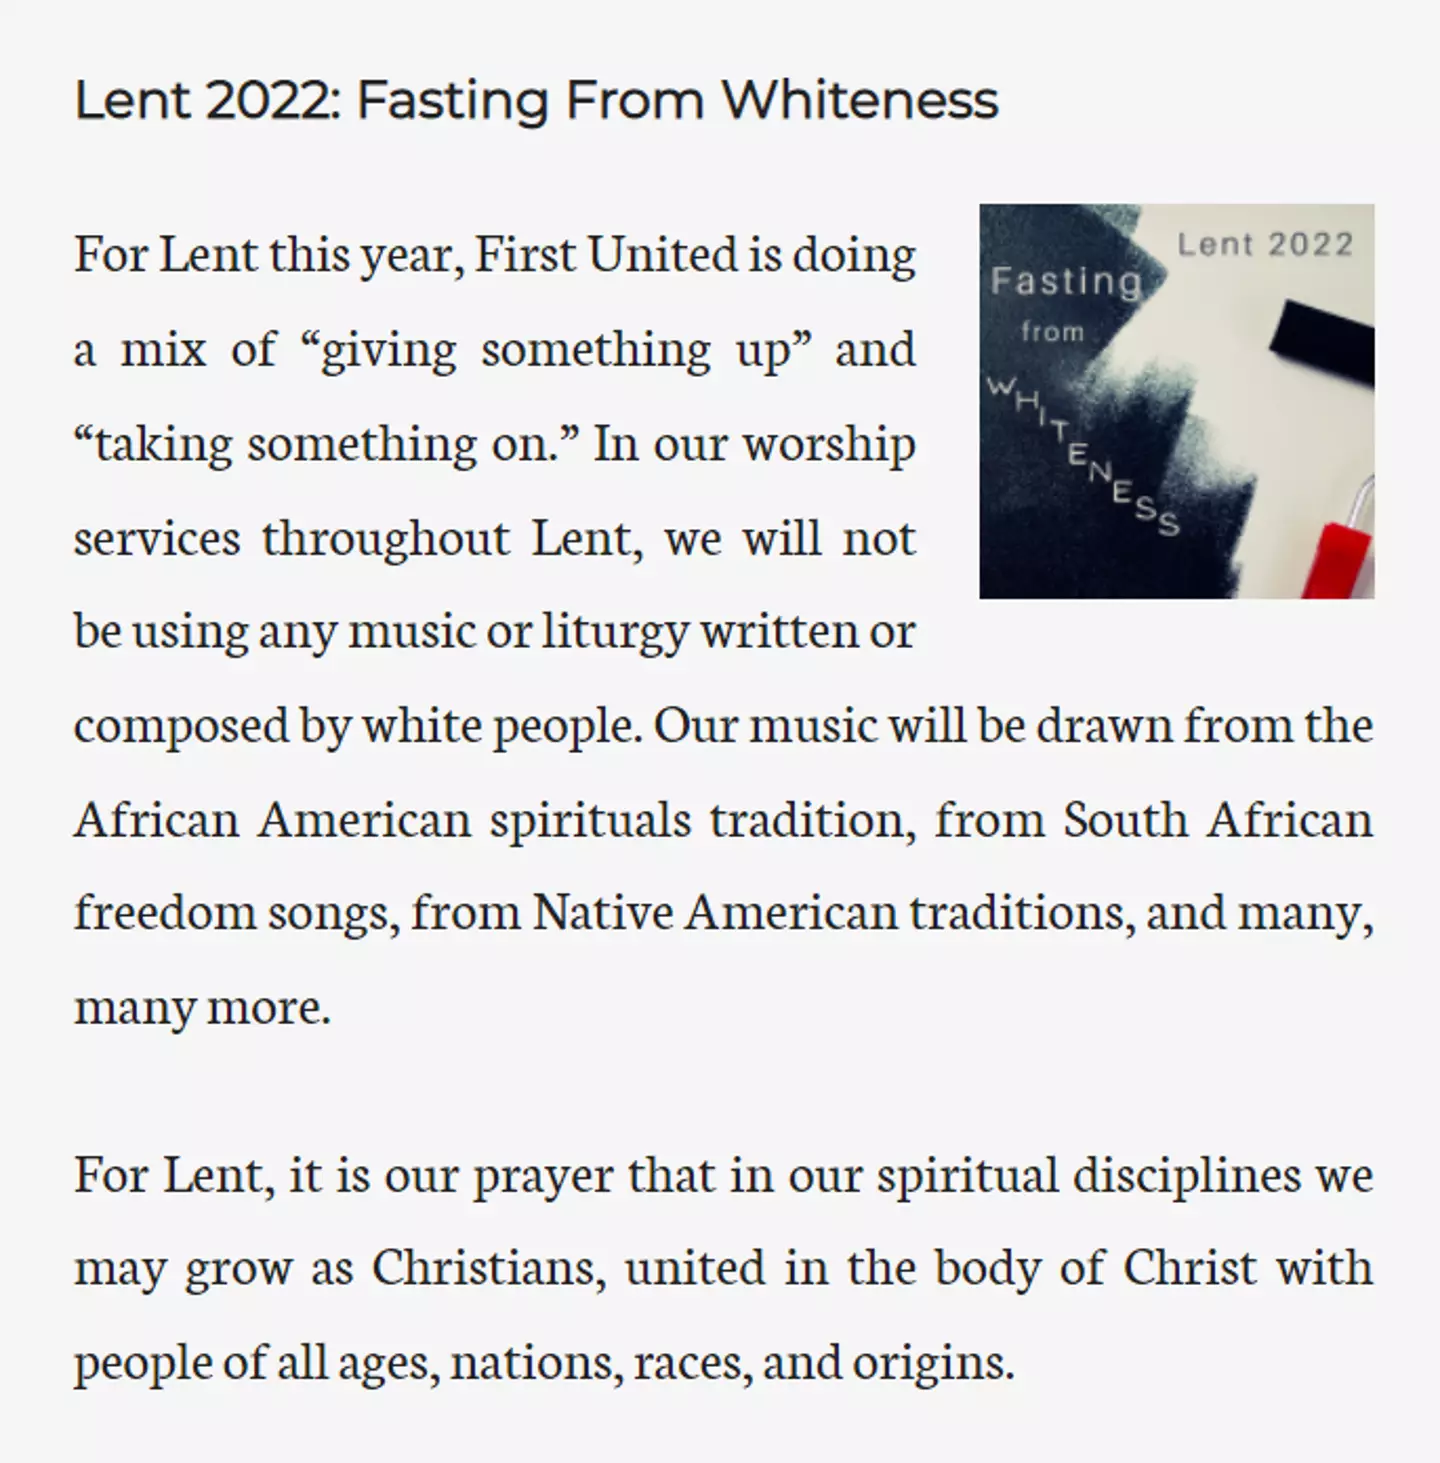 First United Church's blog post.